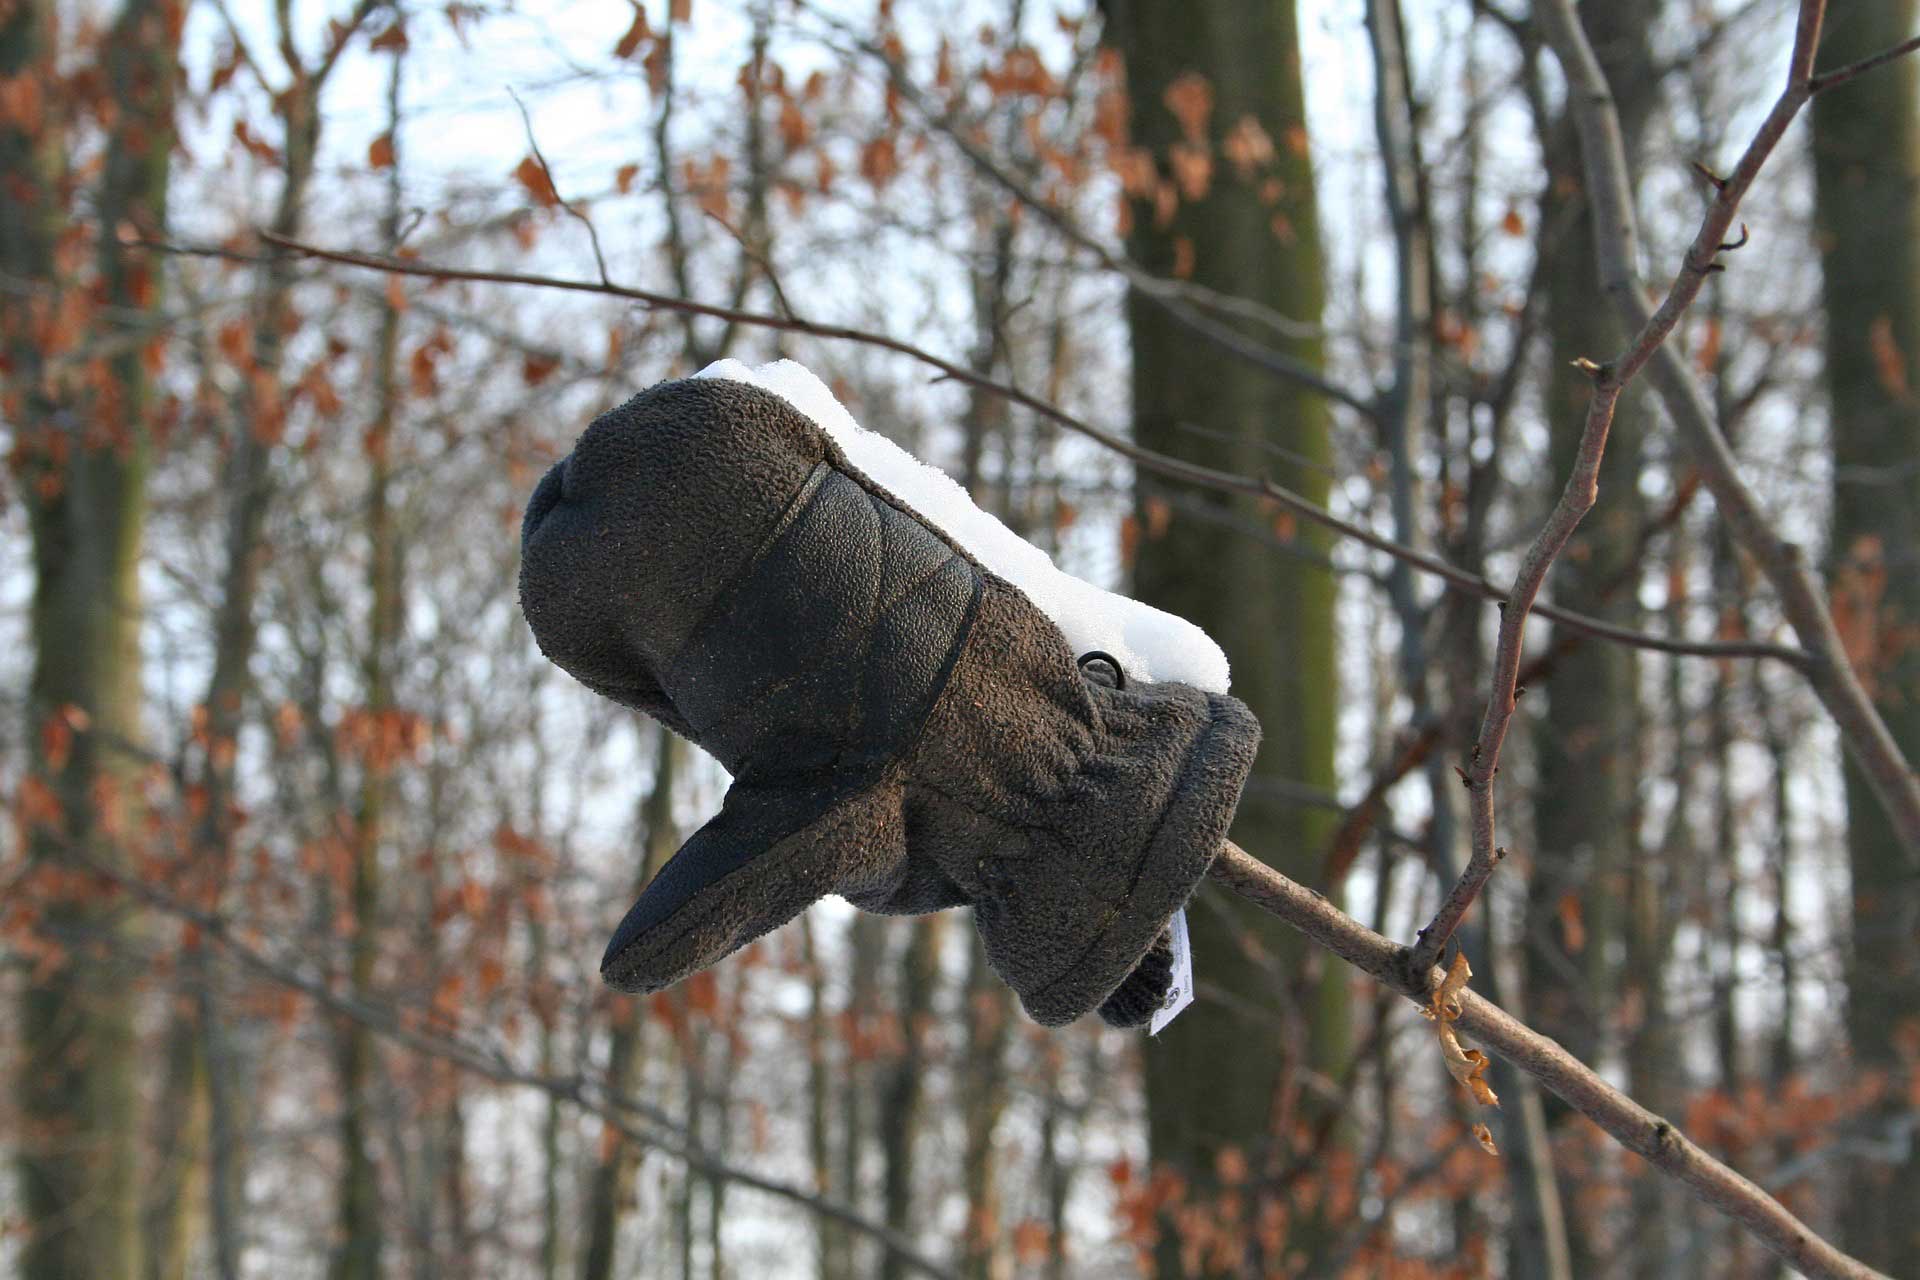 Winter glove covered in snow